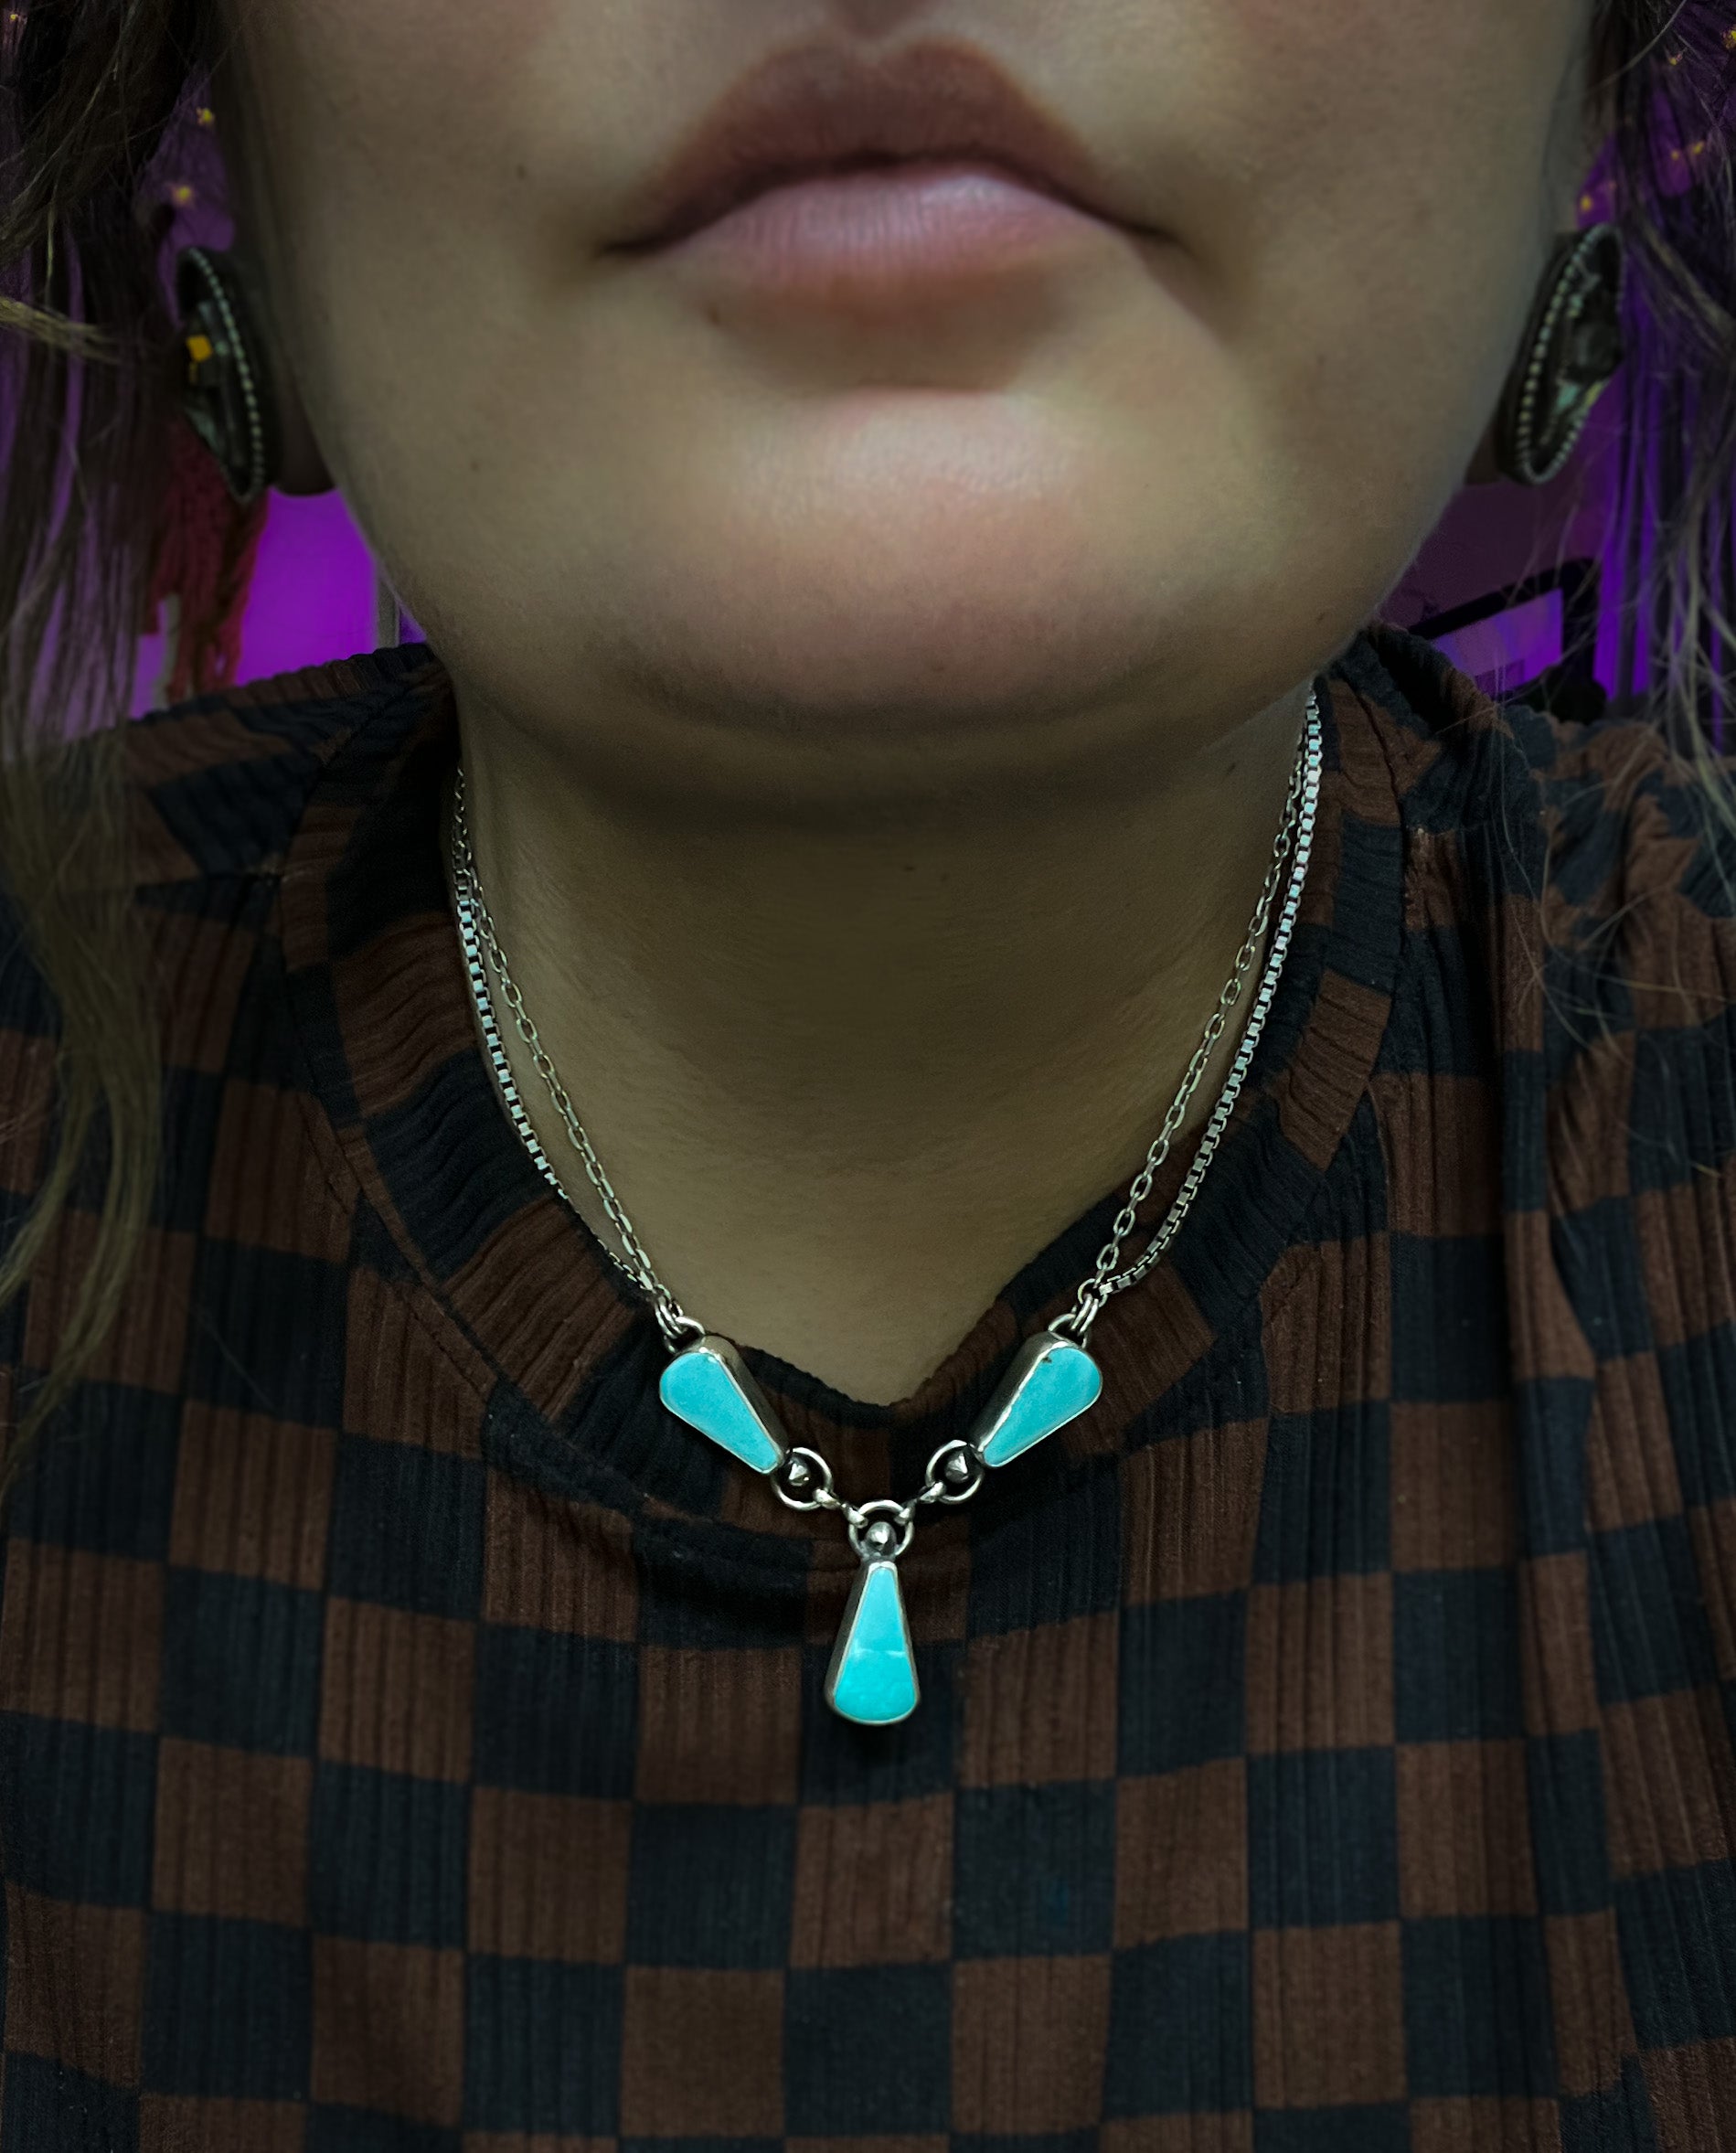 Triple turquoise heavy necklace